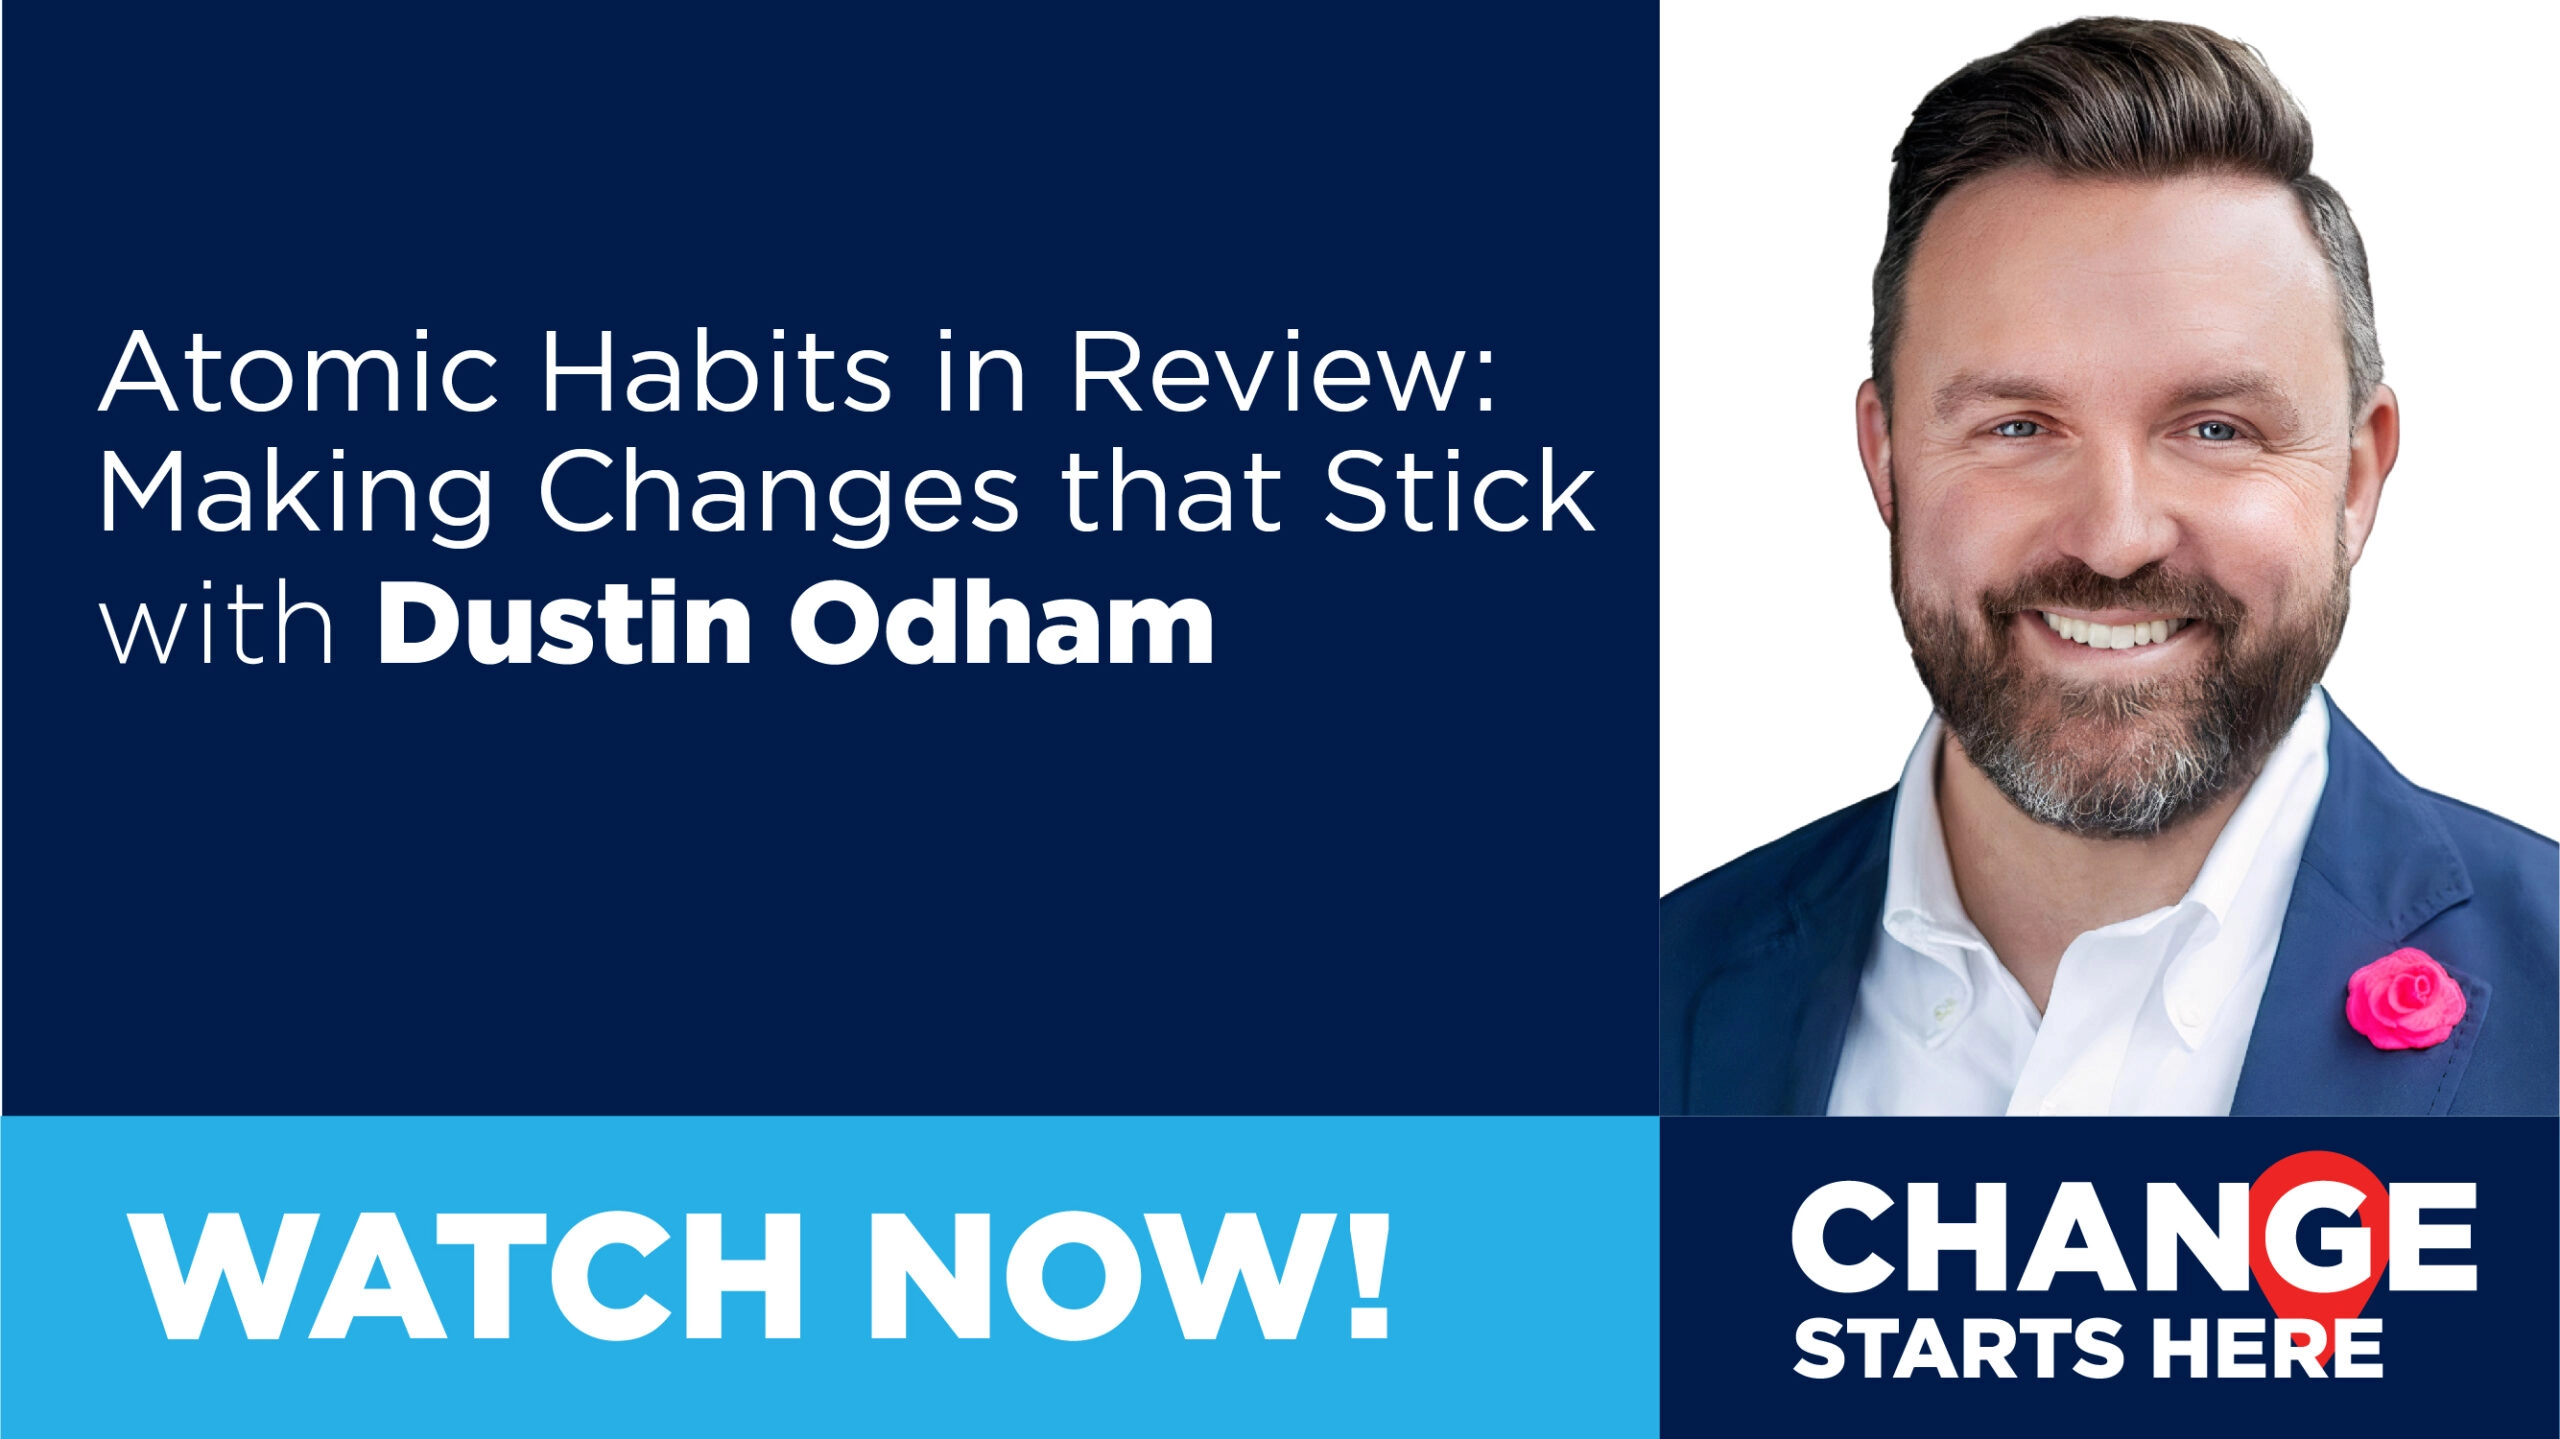 Atomic Habits in Review: Making Changes that Stick